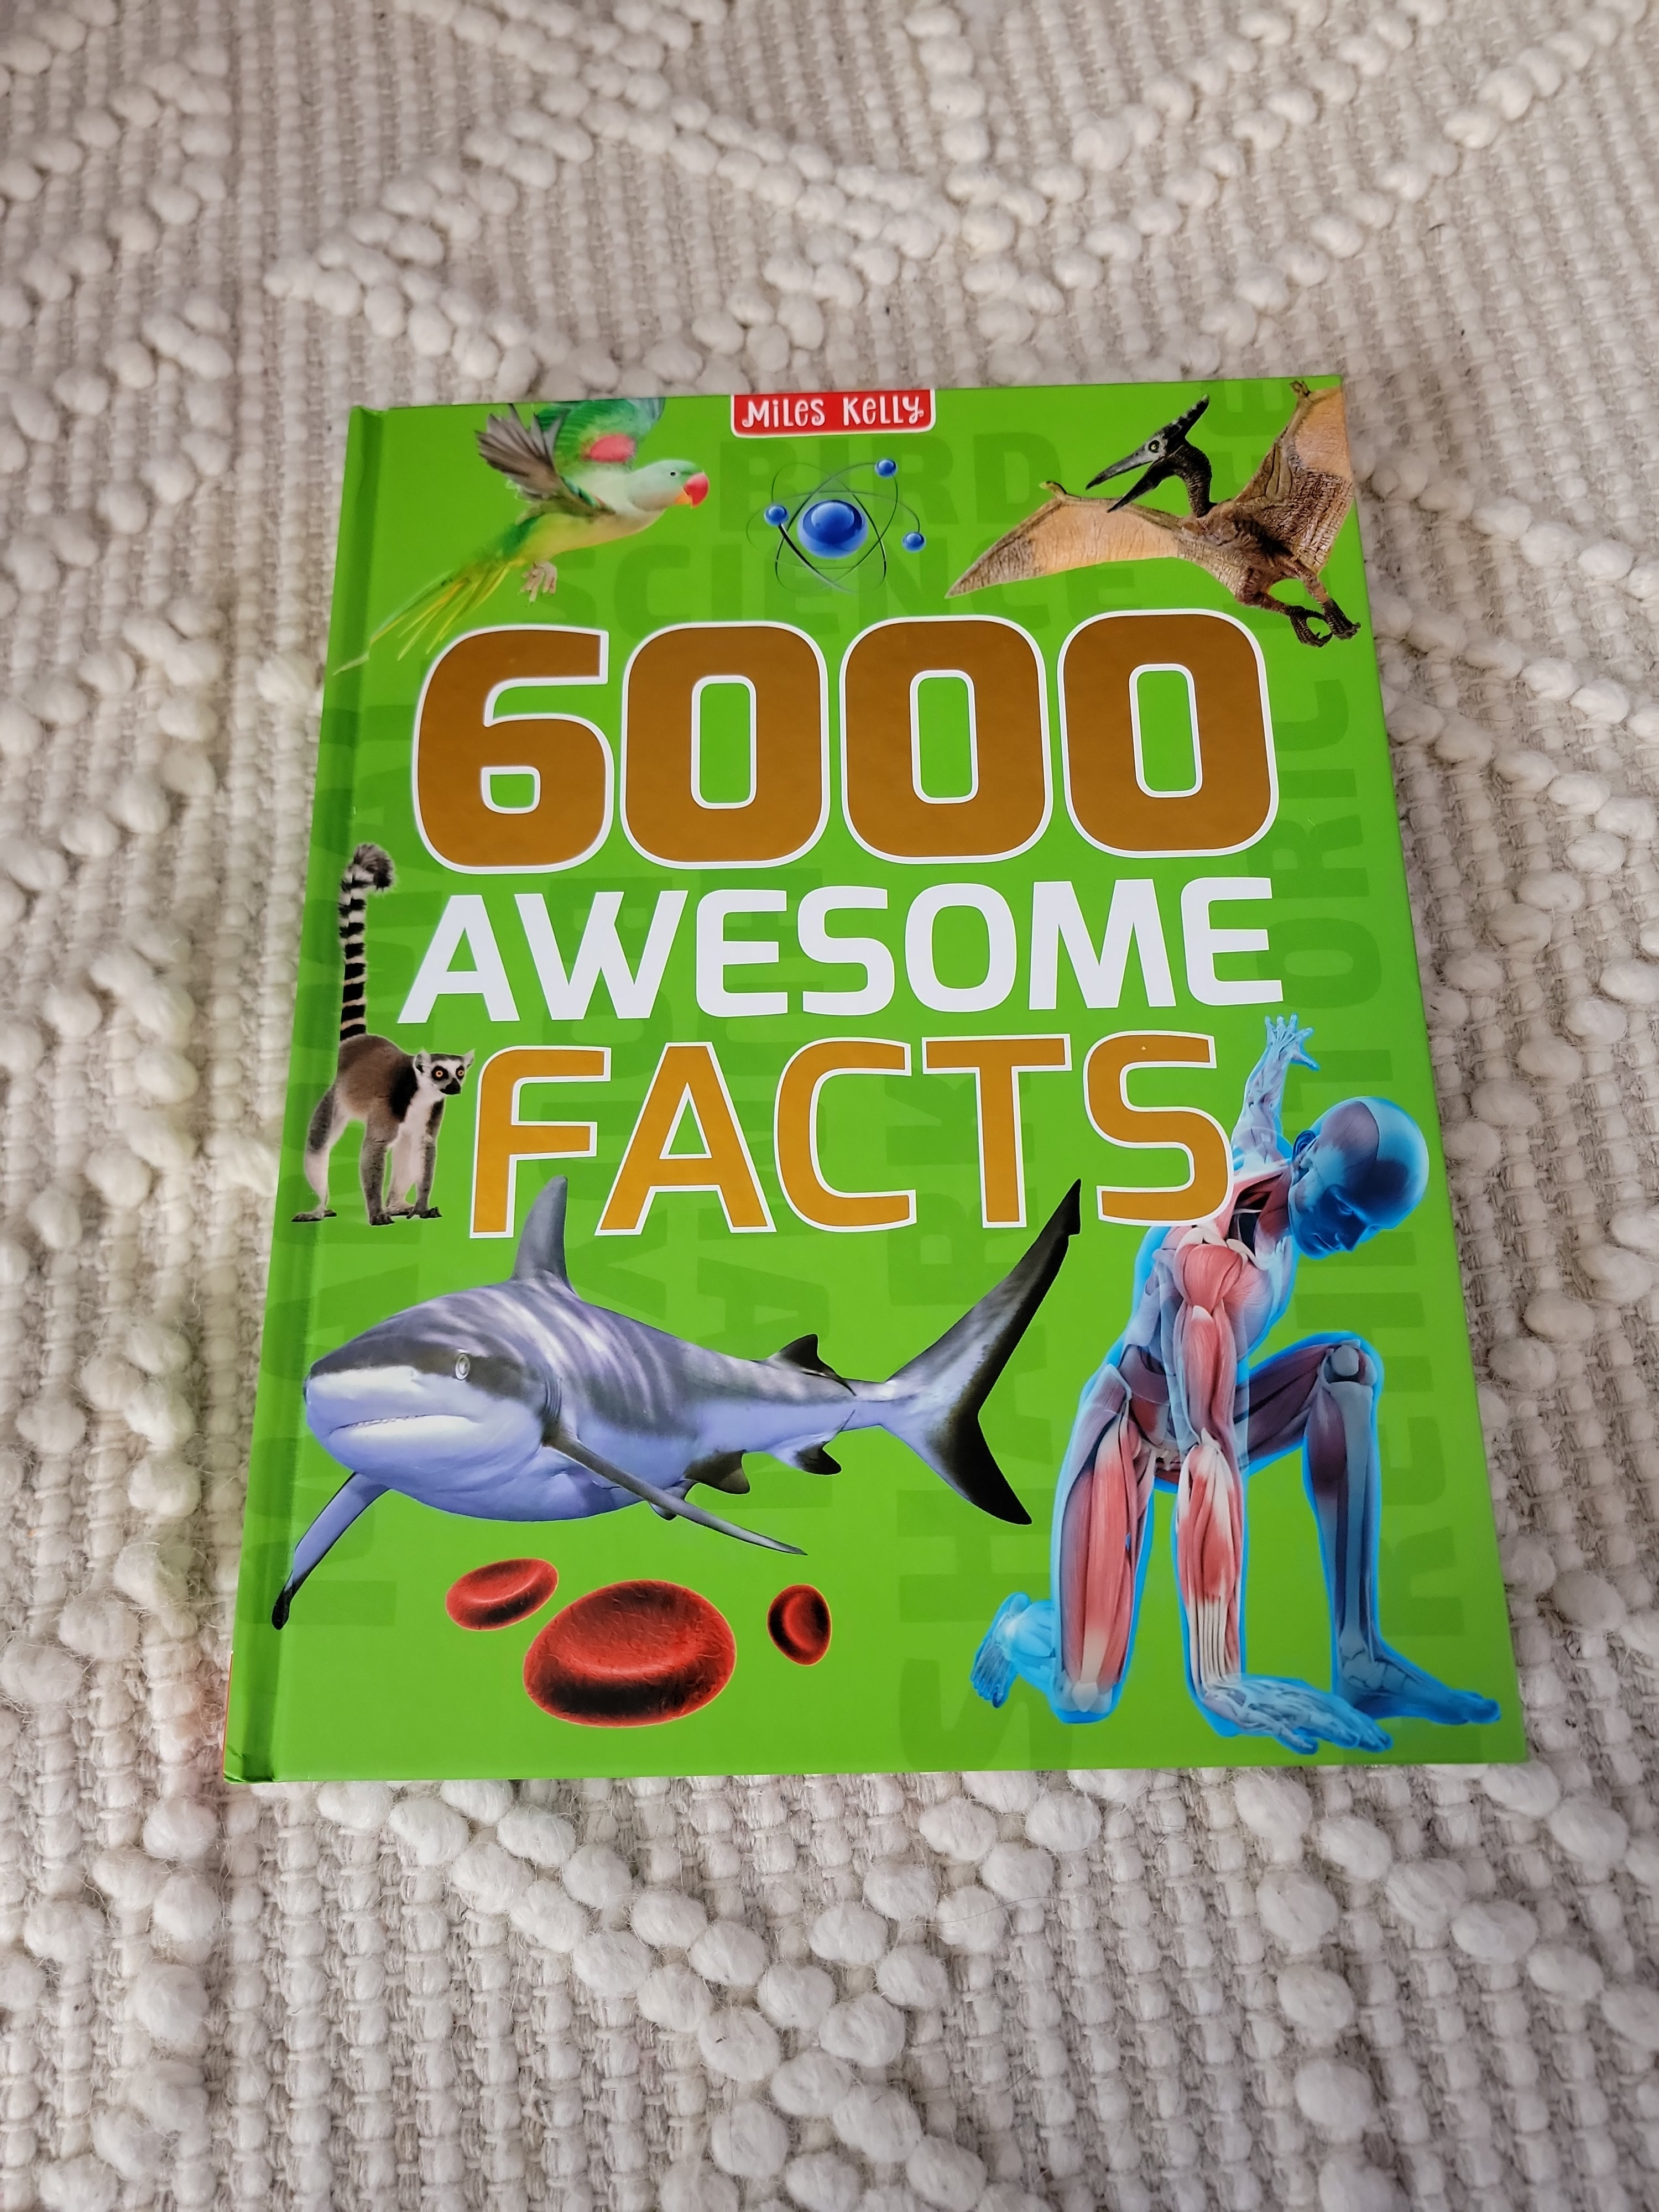 Facts　Miles　by　6000　Hardcover　Pangobooks　Awesome　Kelly,